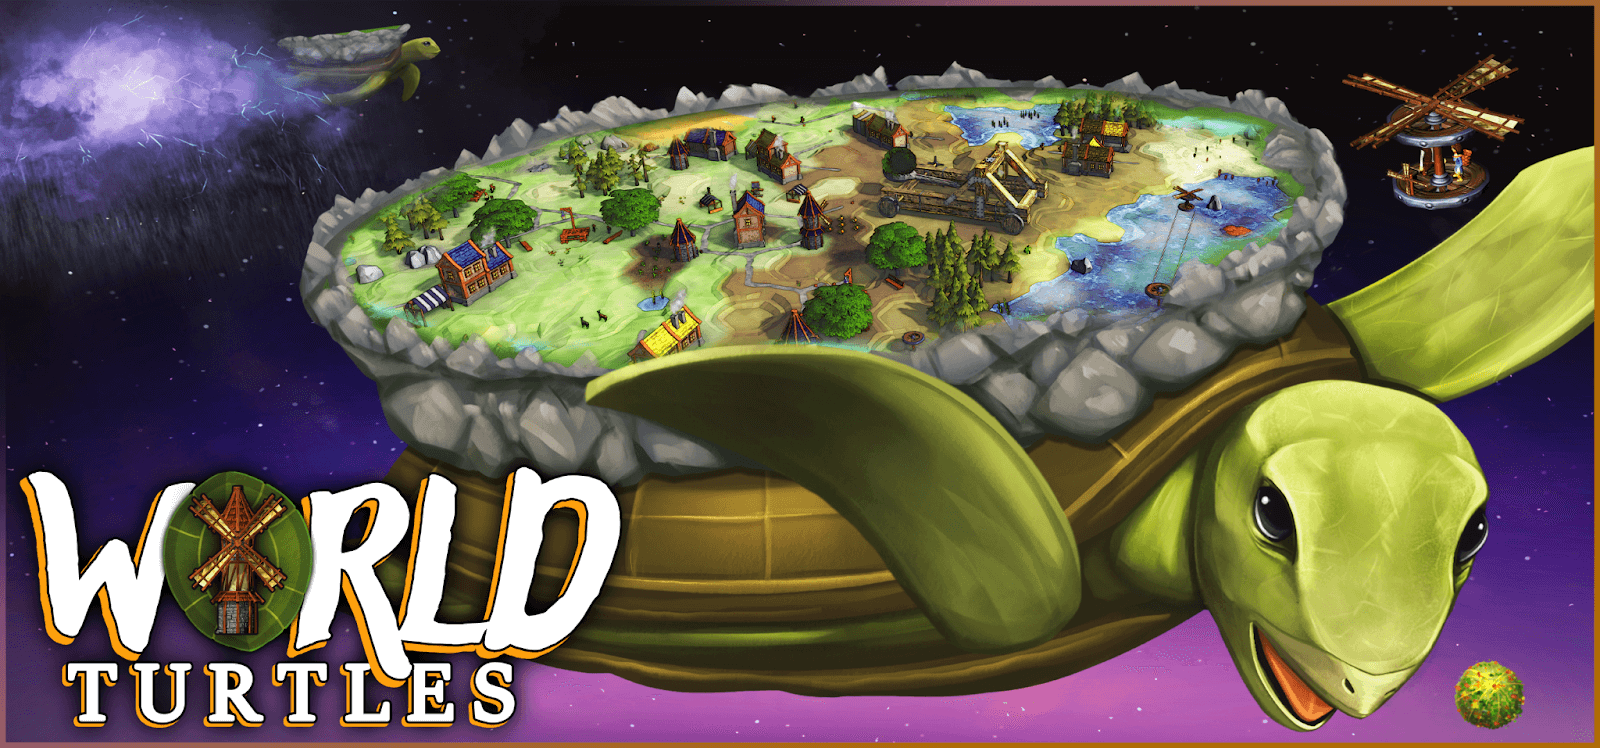 World Turtles, a wholesome colony builder on the back of a giant space turtle, is soon available for PC